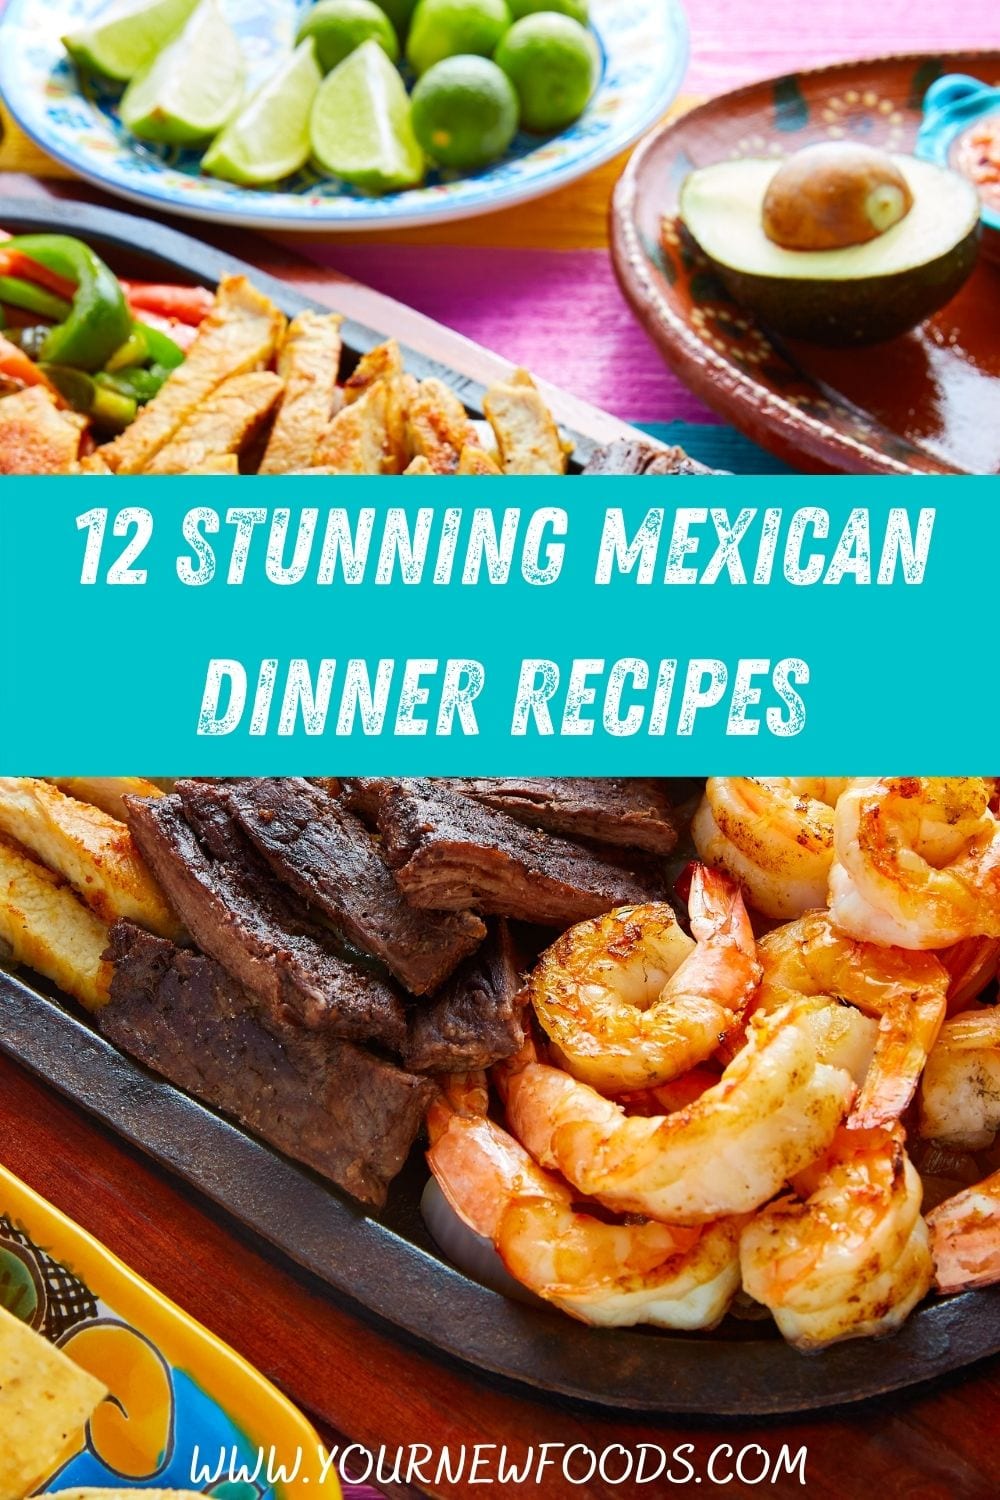 Mexican Dinner Recipes